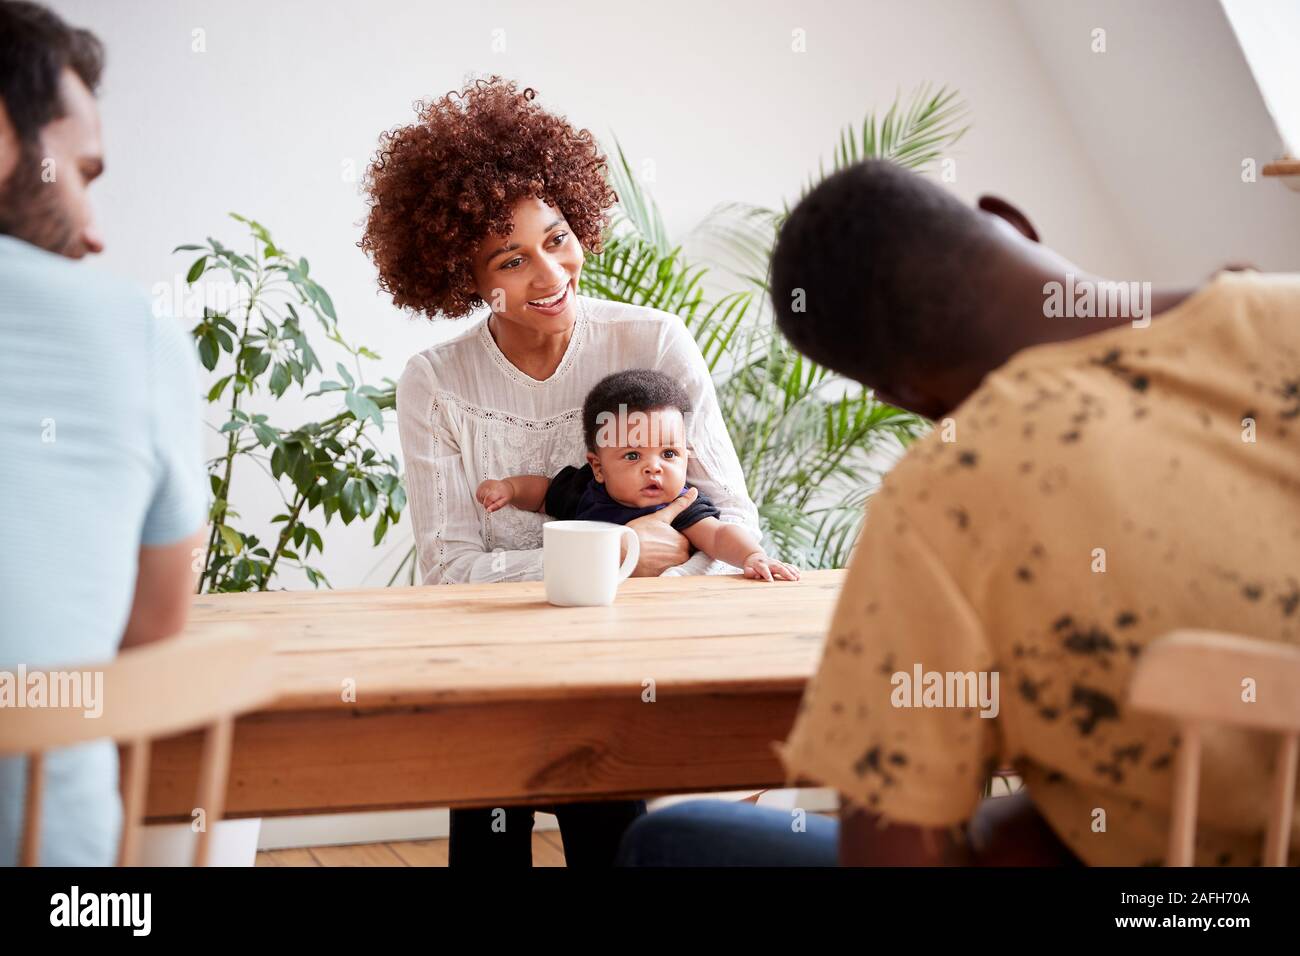 Two Families With Babies Meeting And Talking Around Table On Play Date At Home Stock Photo